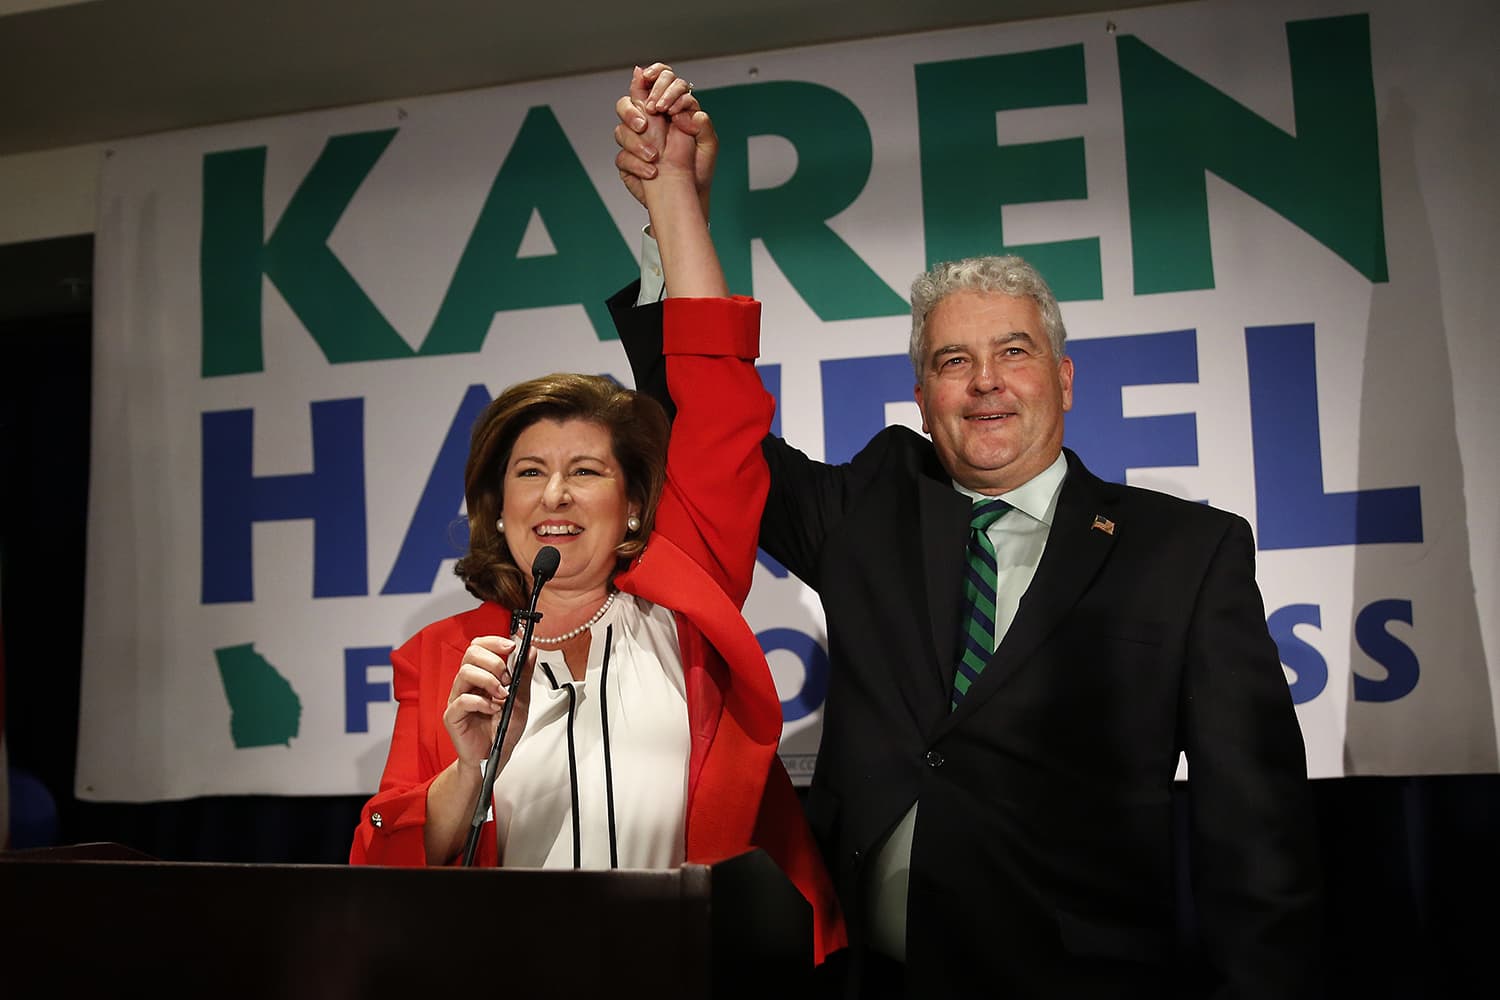 Republican candidate for Georgia's 6th District Congressional seat Karen Handel celebrates with her husband Steve as she declares victory during an election-night watch party Tuesday, June 20, 2017, in Atlanta. (John Bazemore/AP)